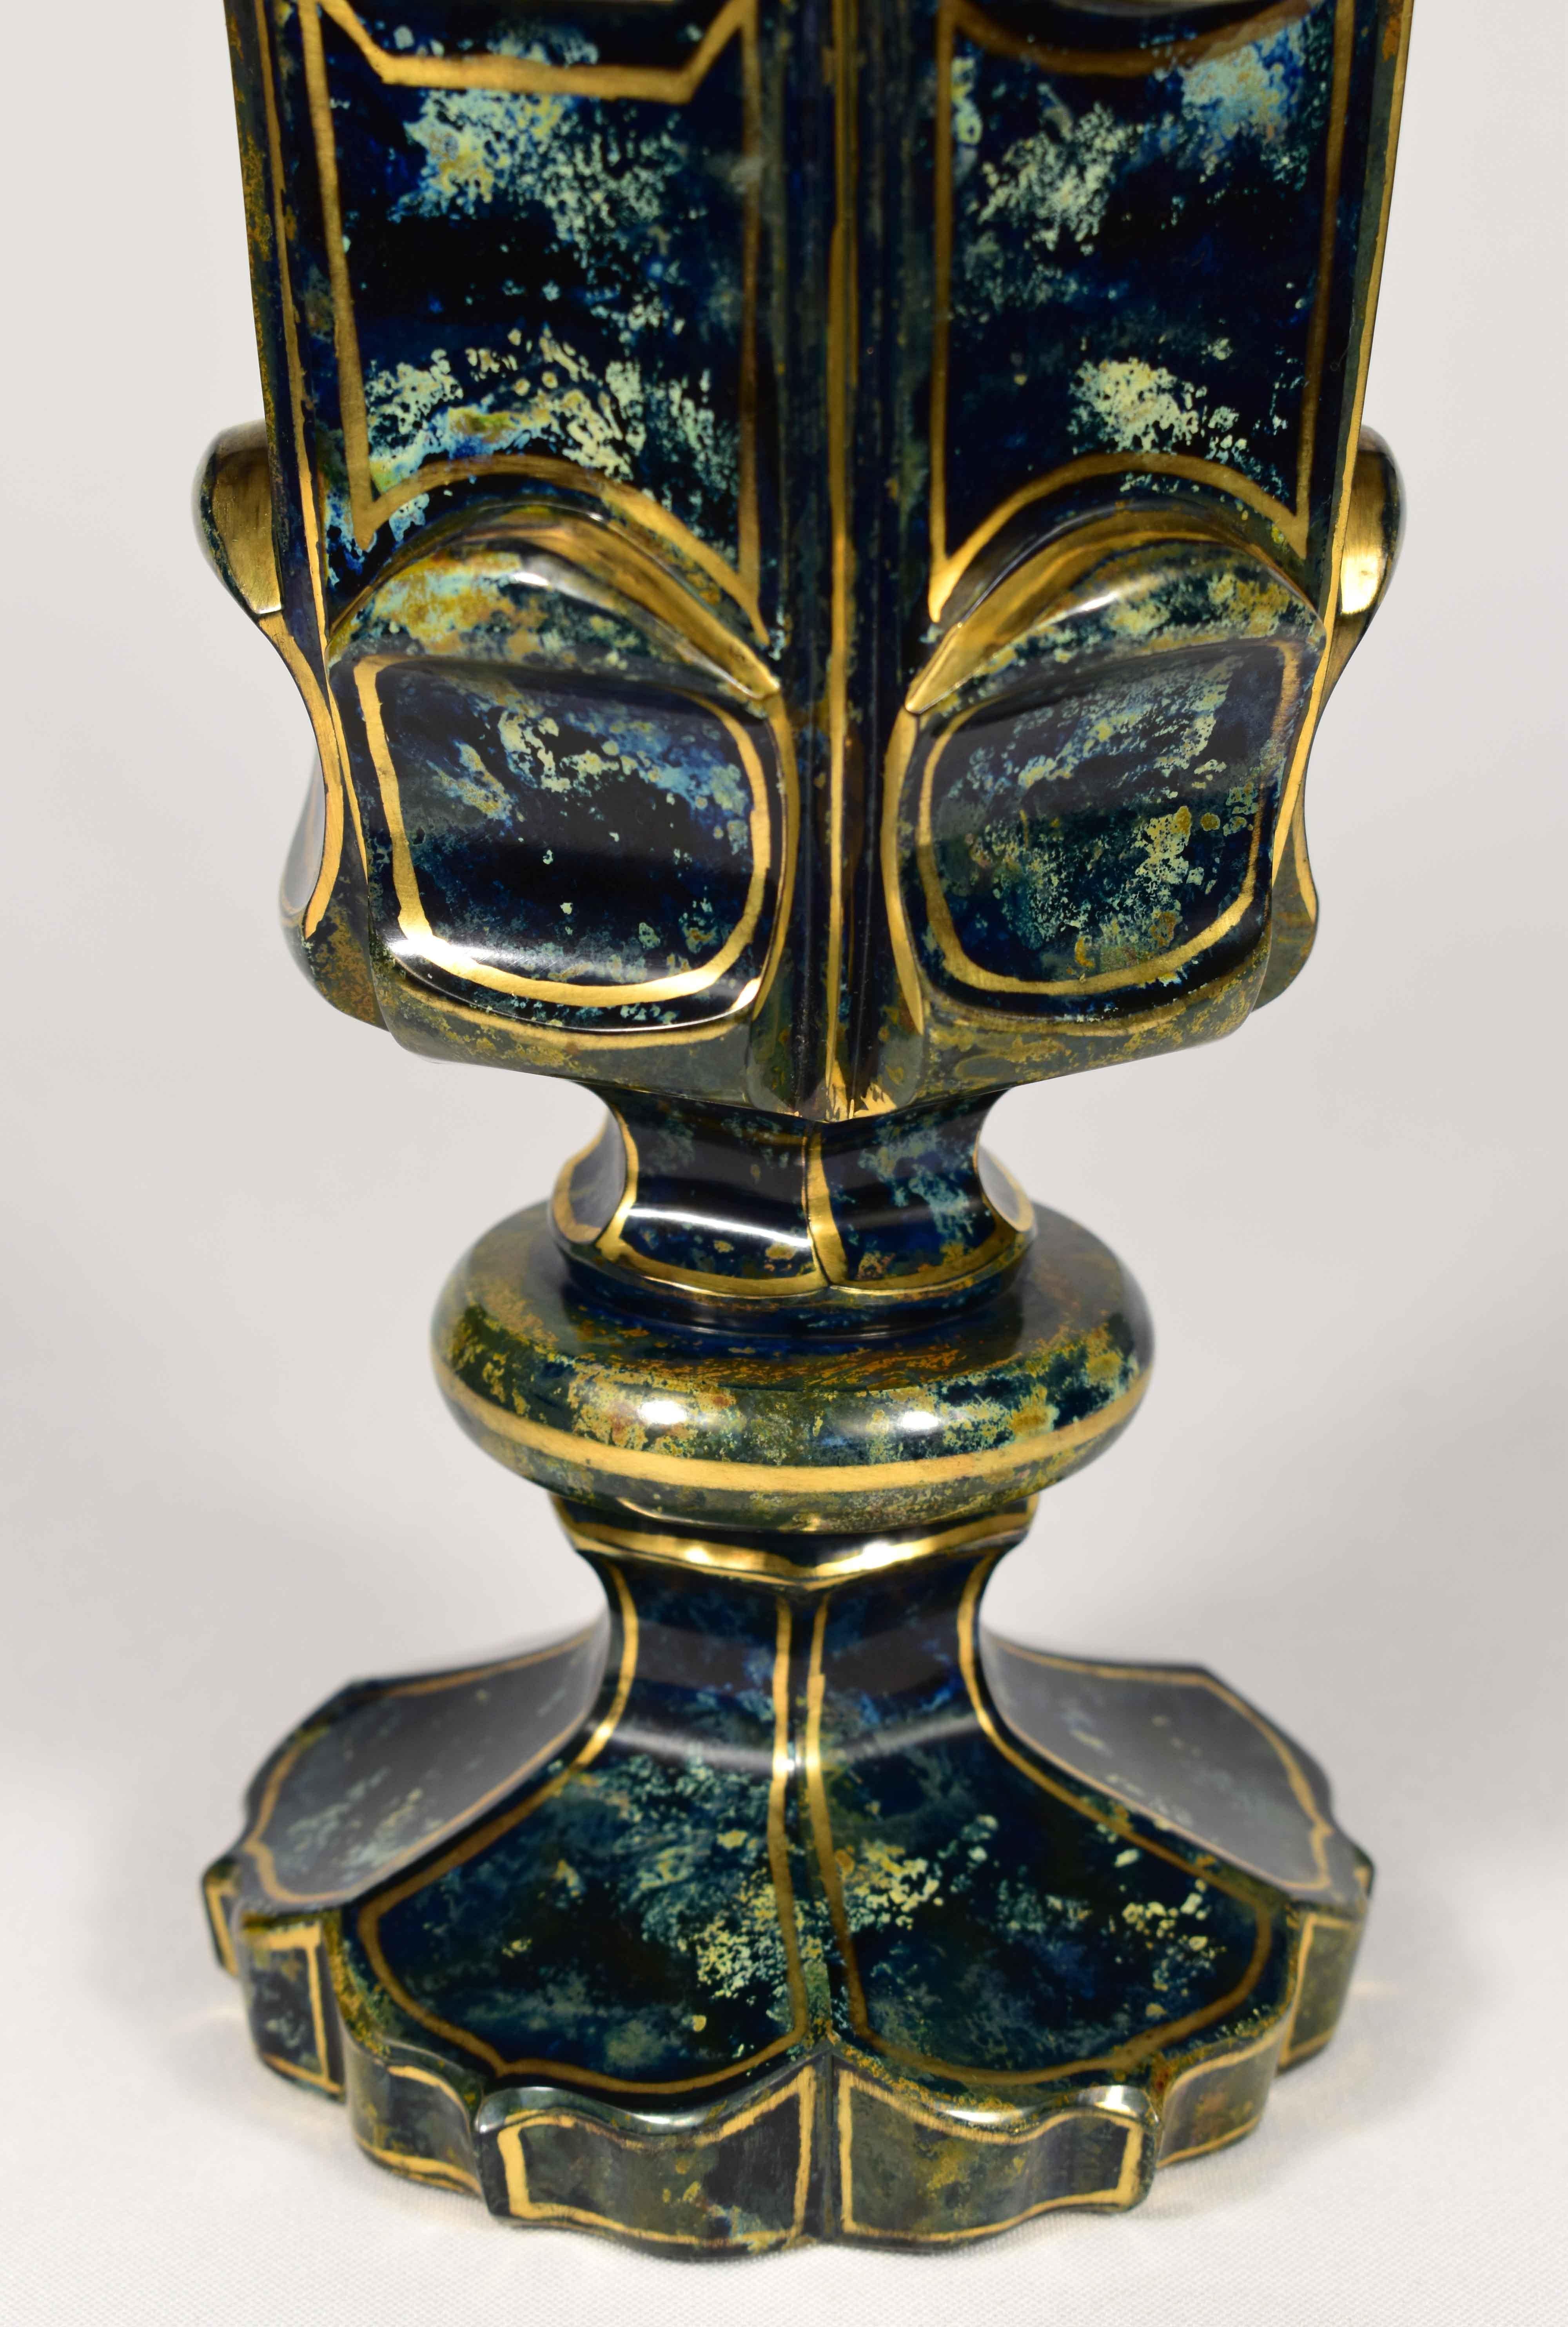 Late 19th Century Lithyalin Glass Goblet, Unique, 19th Century, Engraved Gilded, Bohemian Glass